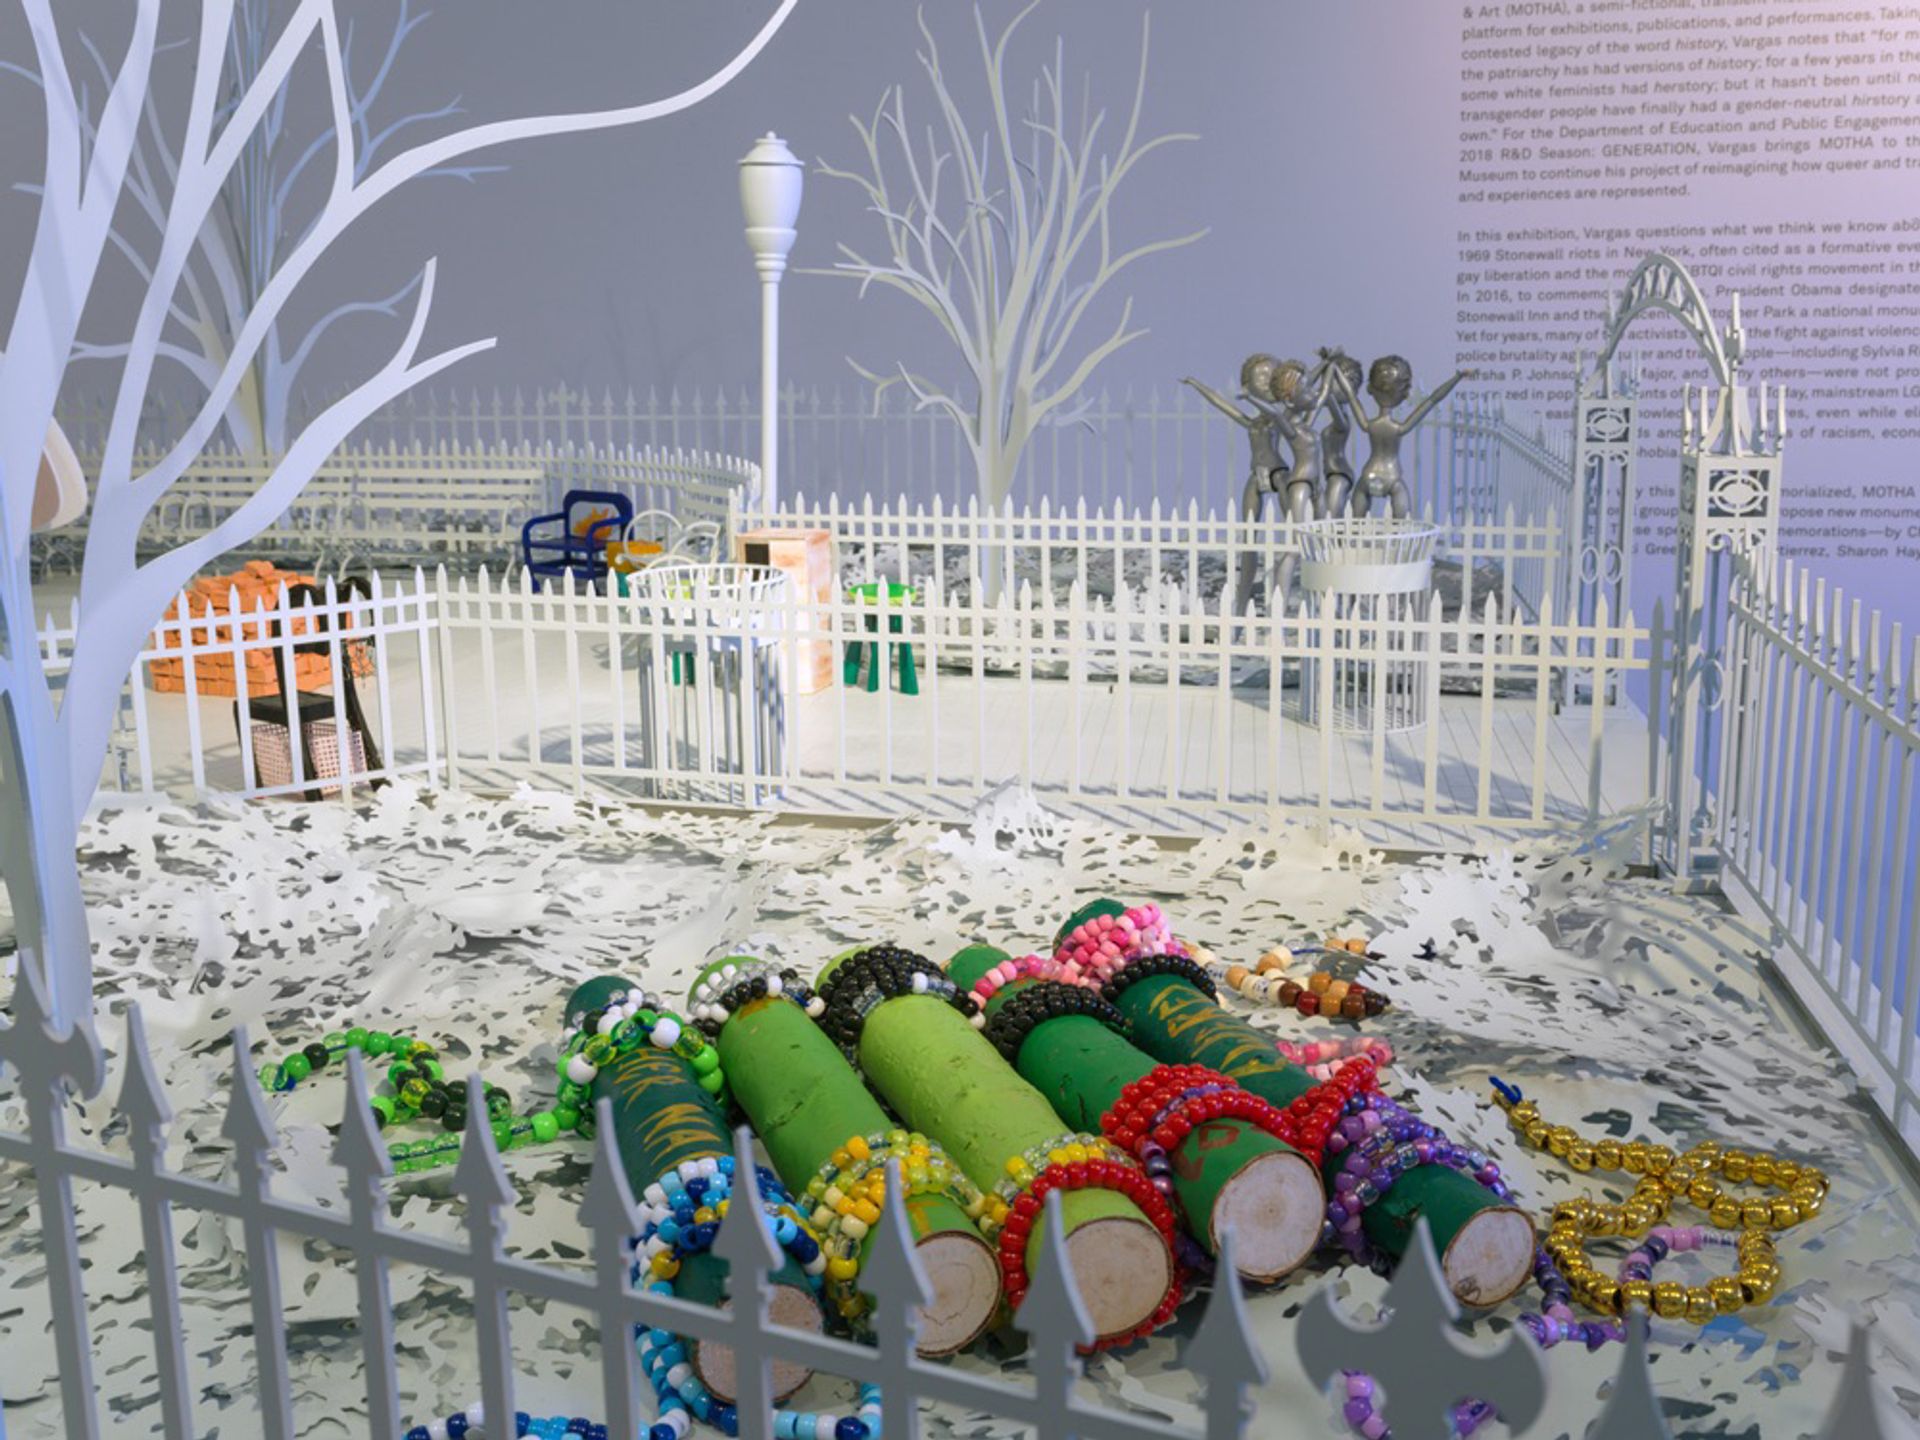 A view of some of the artists' models inside a scale model of Christopher Park at the New Museum New Museum